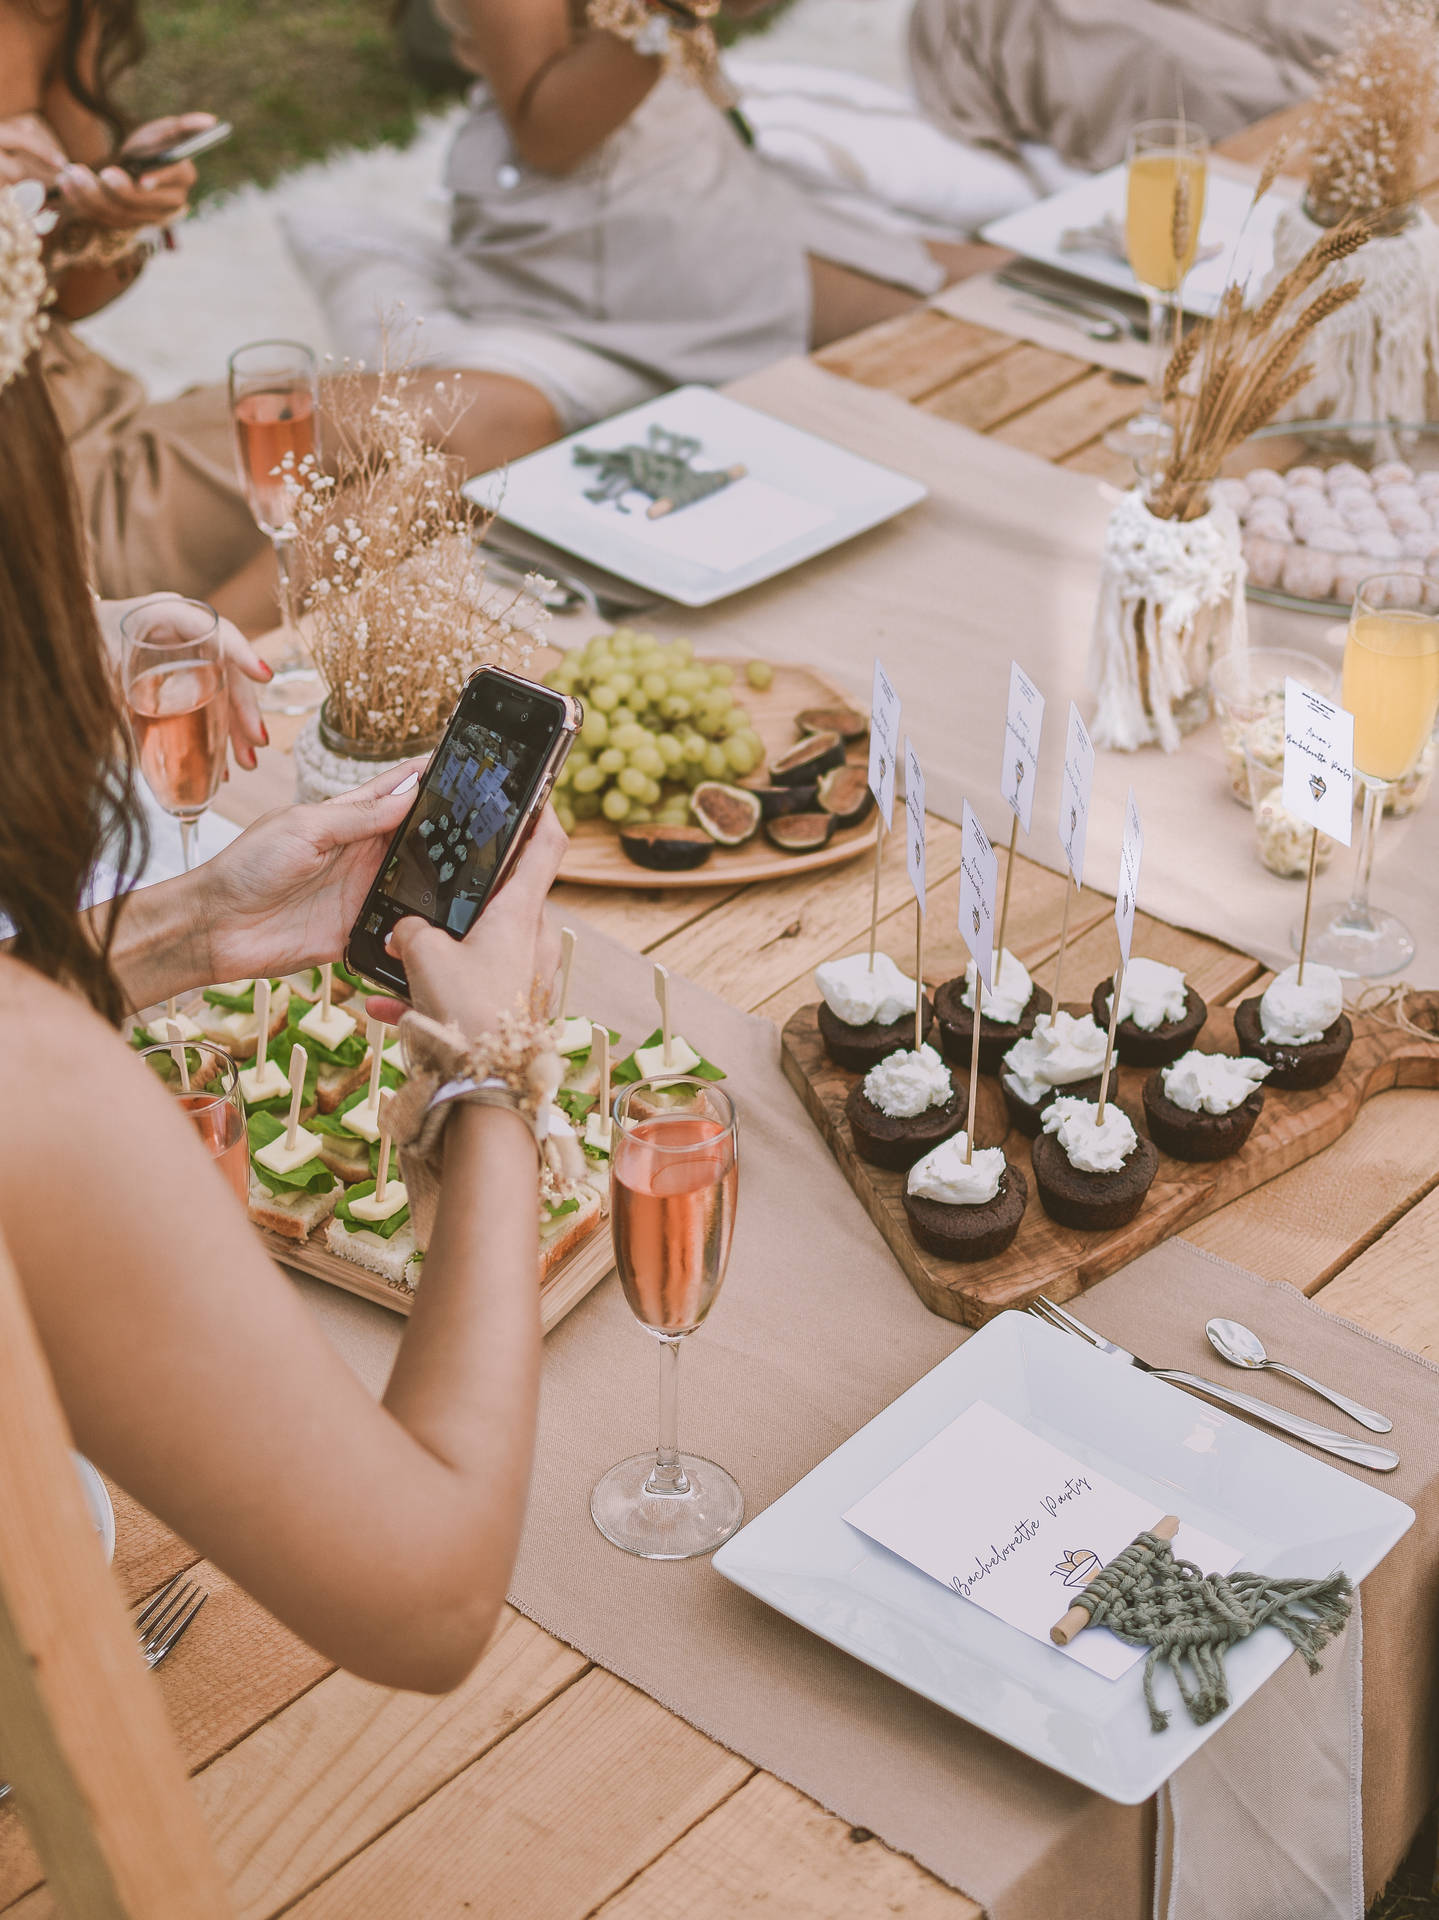 Woman Taking Photo Of Bachelorette Party Food Background